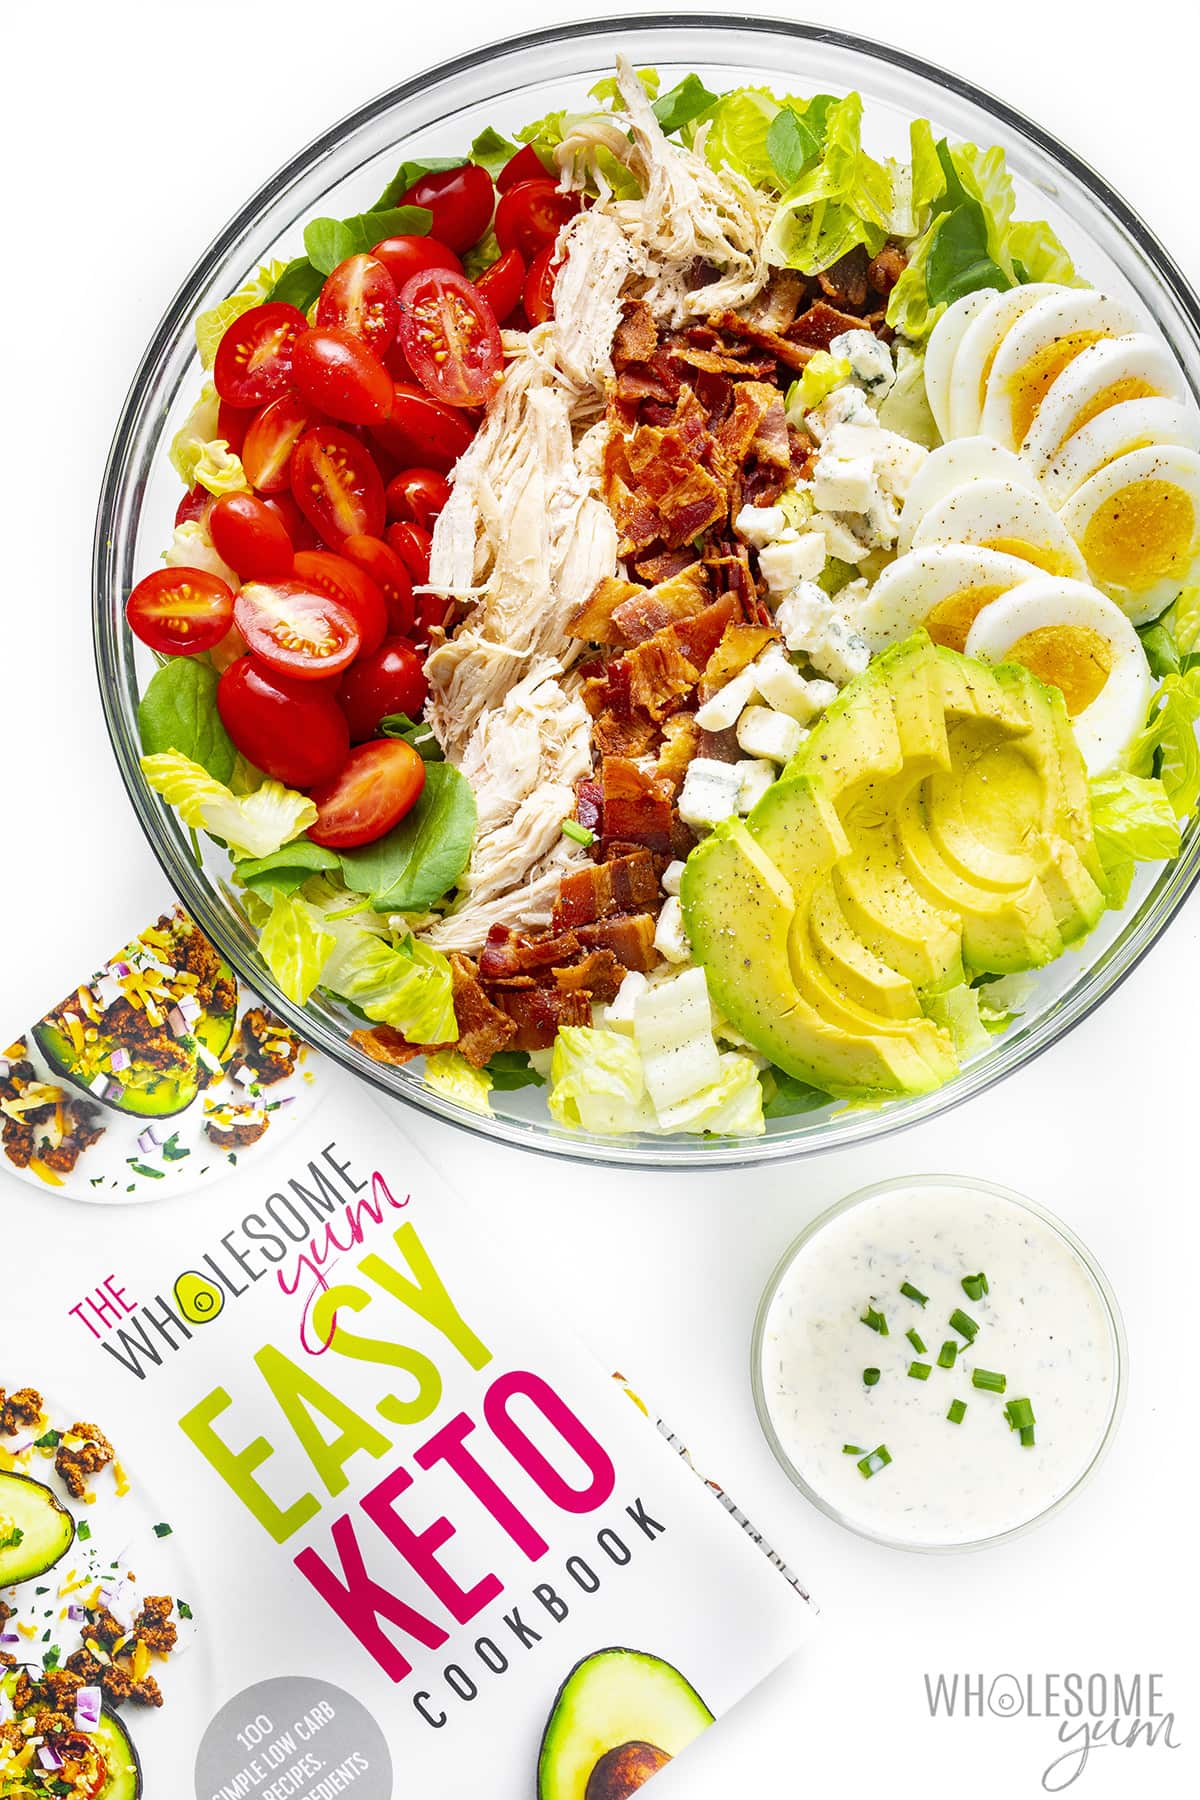 Cobb salad in a bowl next to cookbook.